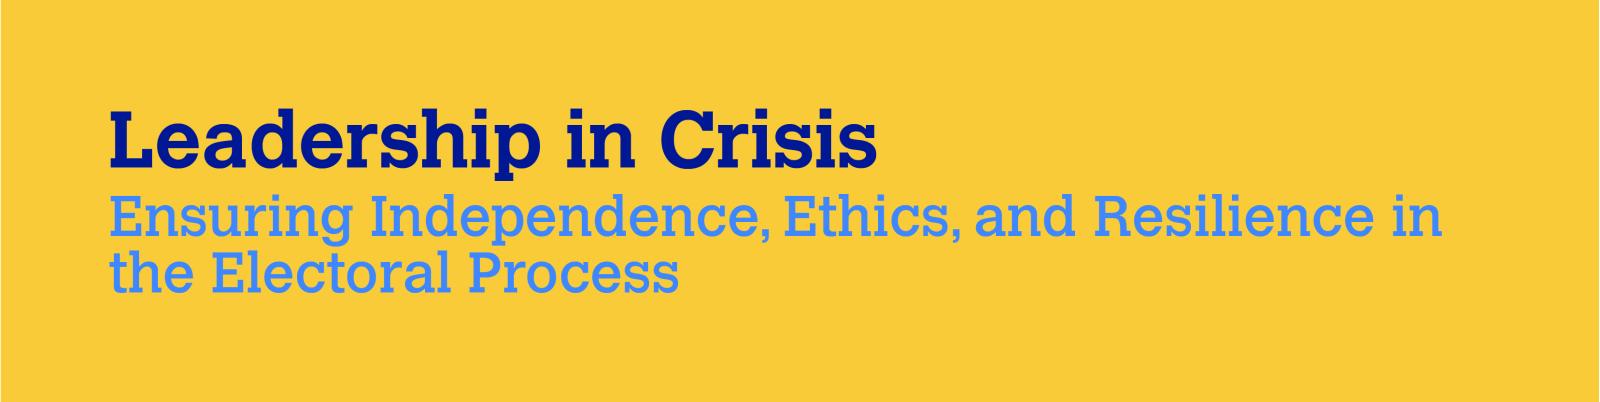 Leadership in Crisis: Ensuring Independence, Ethics, and Resilience in the Electoral Process